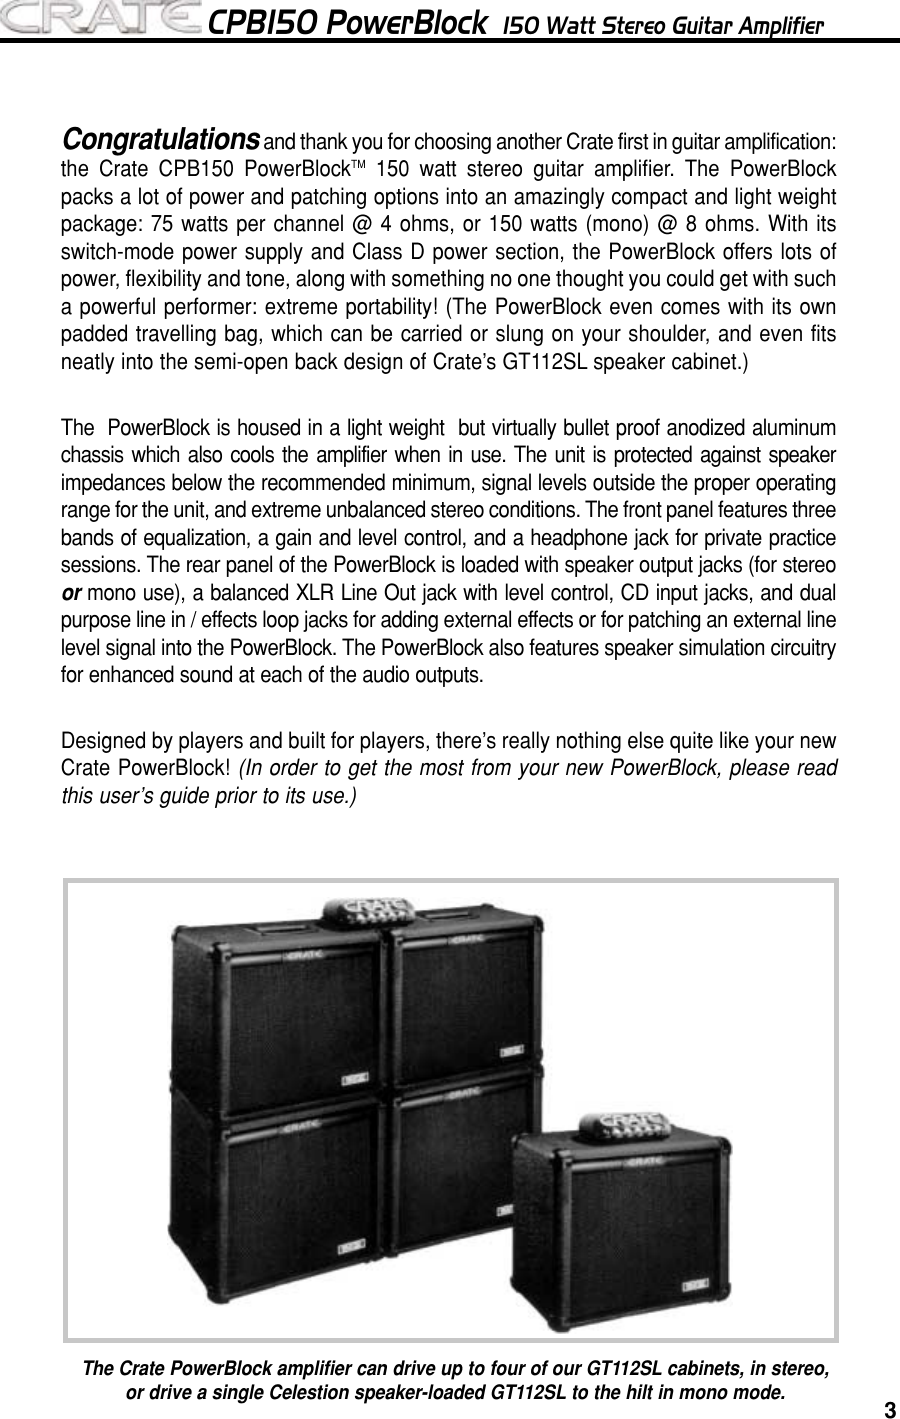 Page 3 of 8 - Crate-Amplifiers Crate-Amplifiers-Power-Block-Cpb150-Users-Manual-  Crate-amplifiers-power-block-cpb150-users-manual